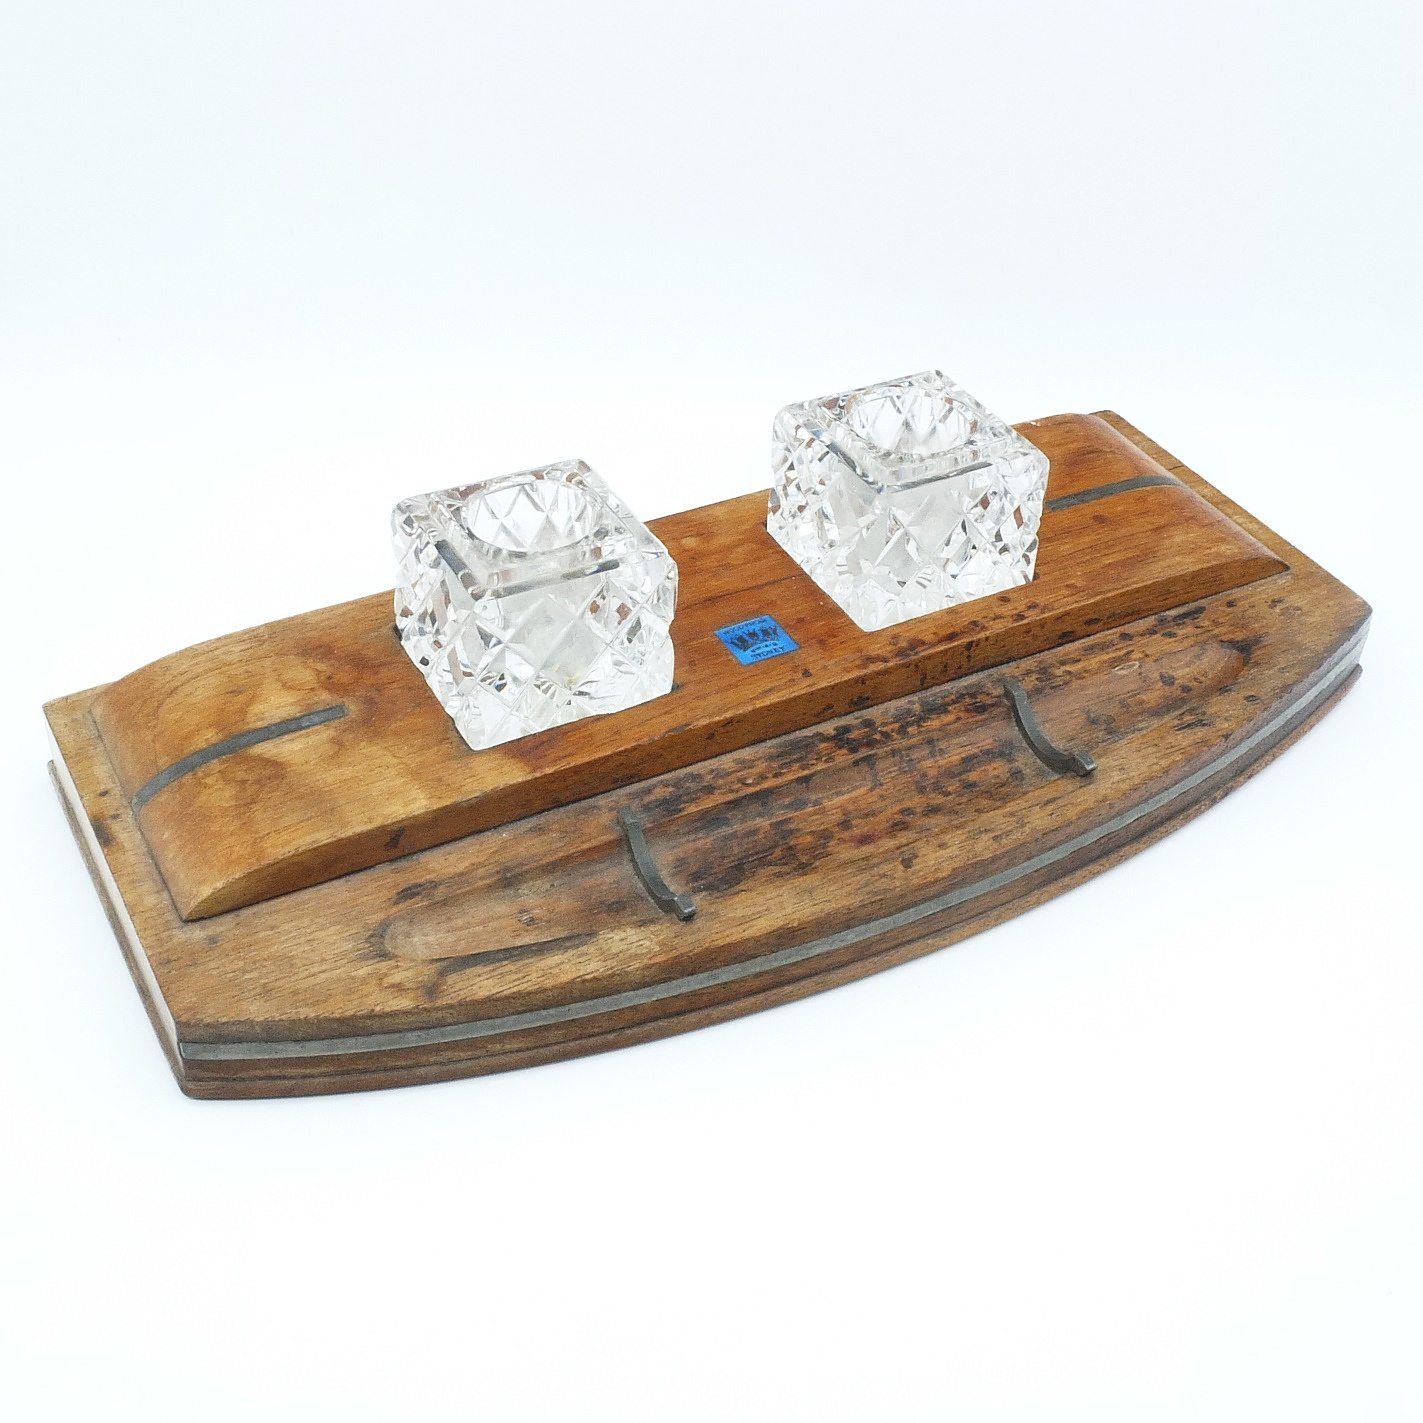 'Carved Desk Set From Wood From HMAS Sydney'